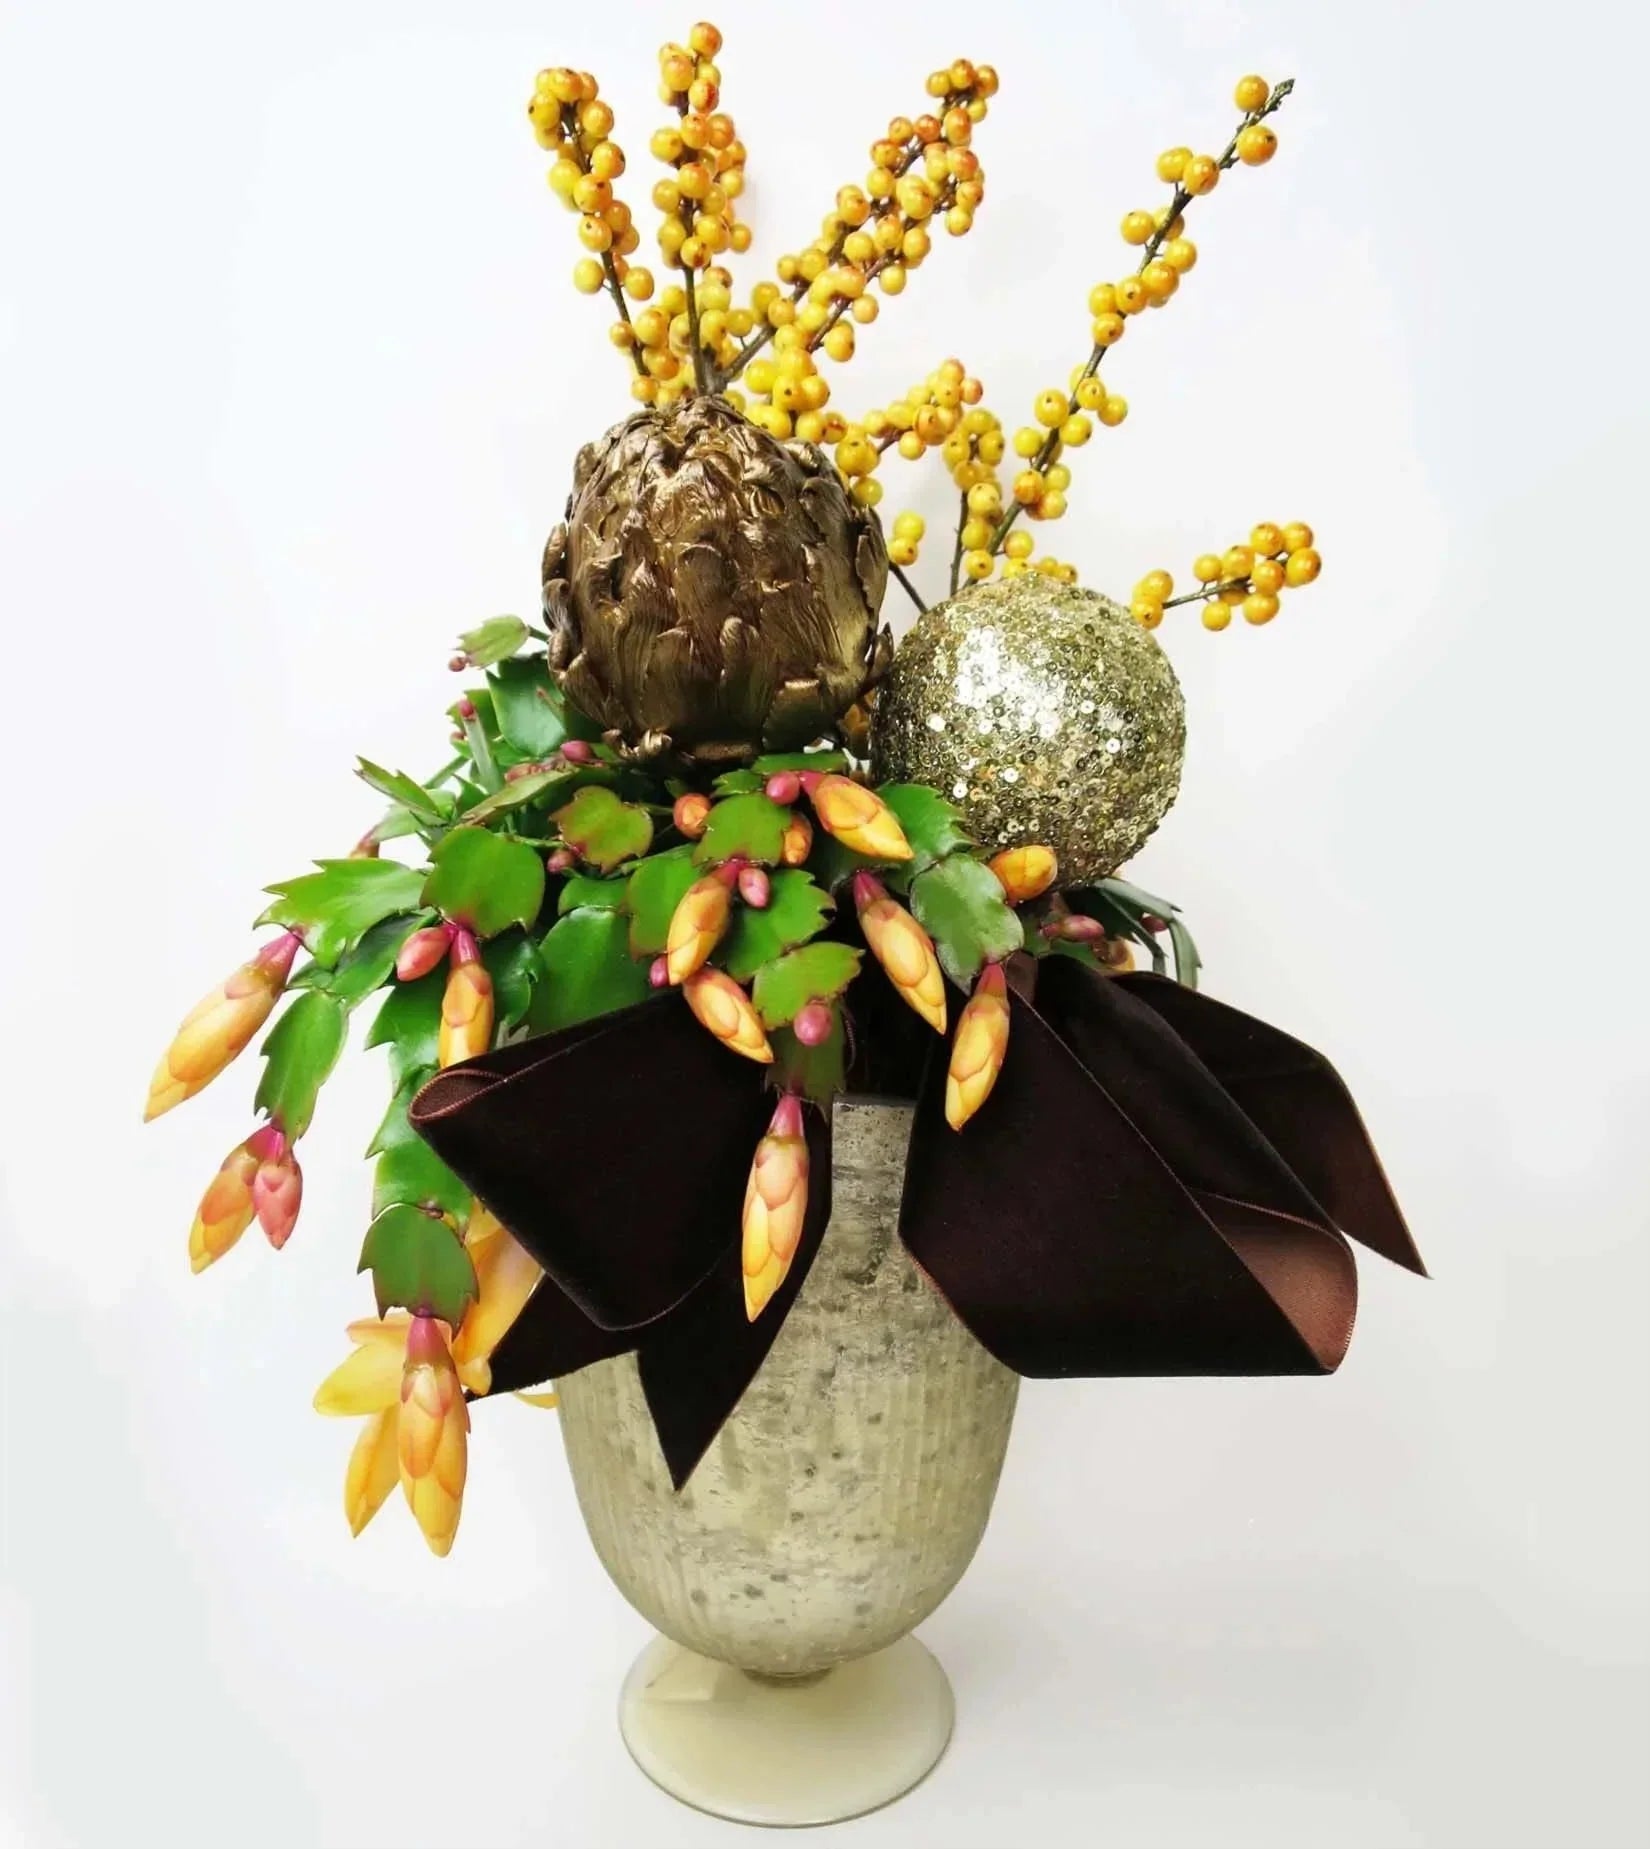 Pot of Gold Christmas Cactus™ - vase with orange Ilex berries and Christmas Cactus are accented with gold painted Artichoke and a festive ornament.